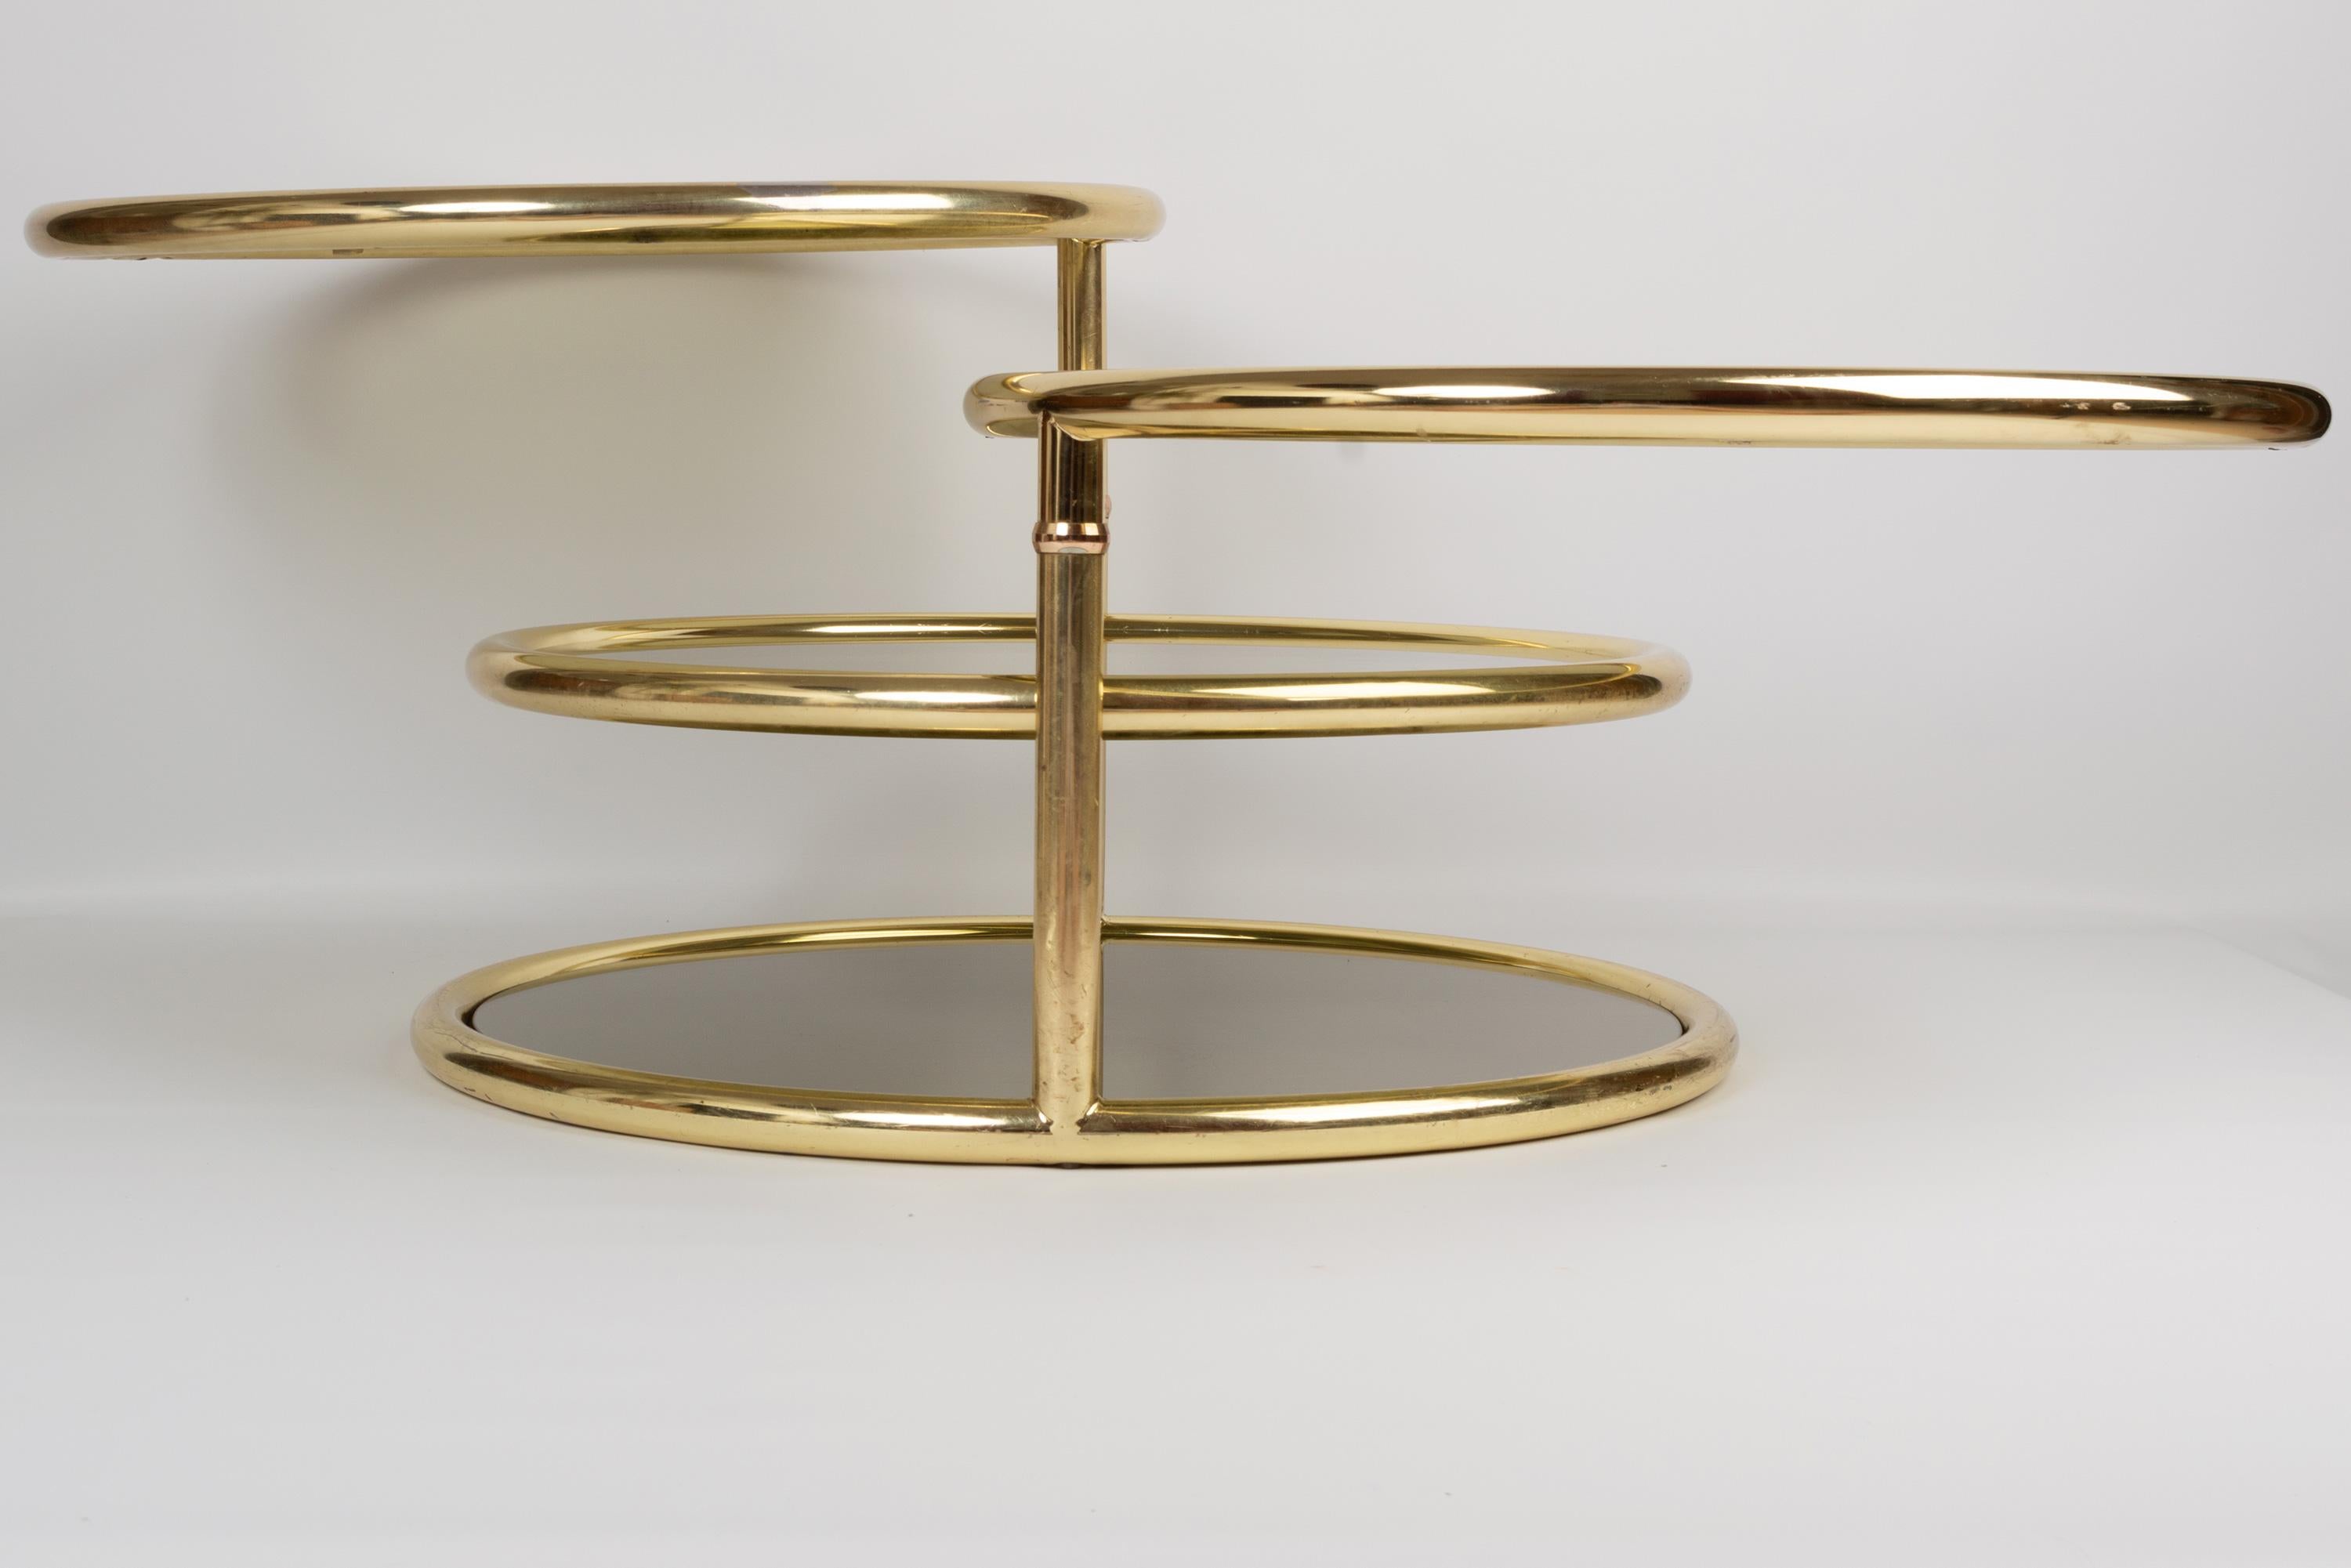 Midcentury Circular Brass Swivel Tiered Coffee Cocktail Table, attributed to DIA For Sale 1